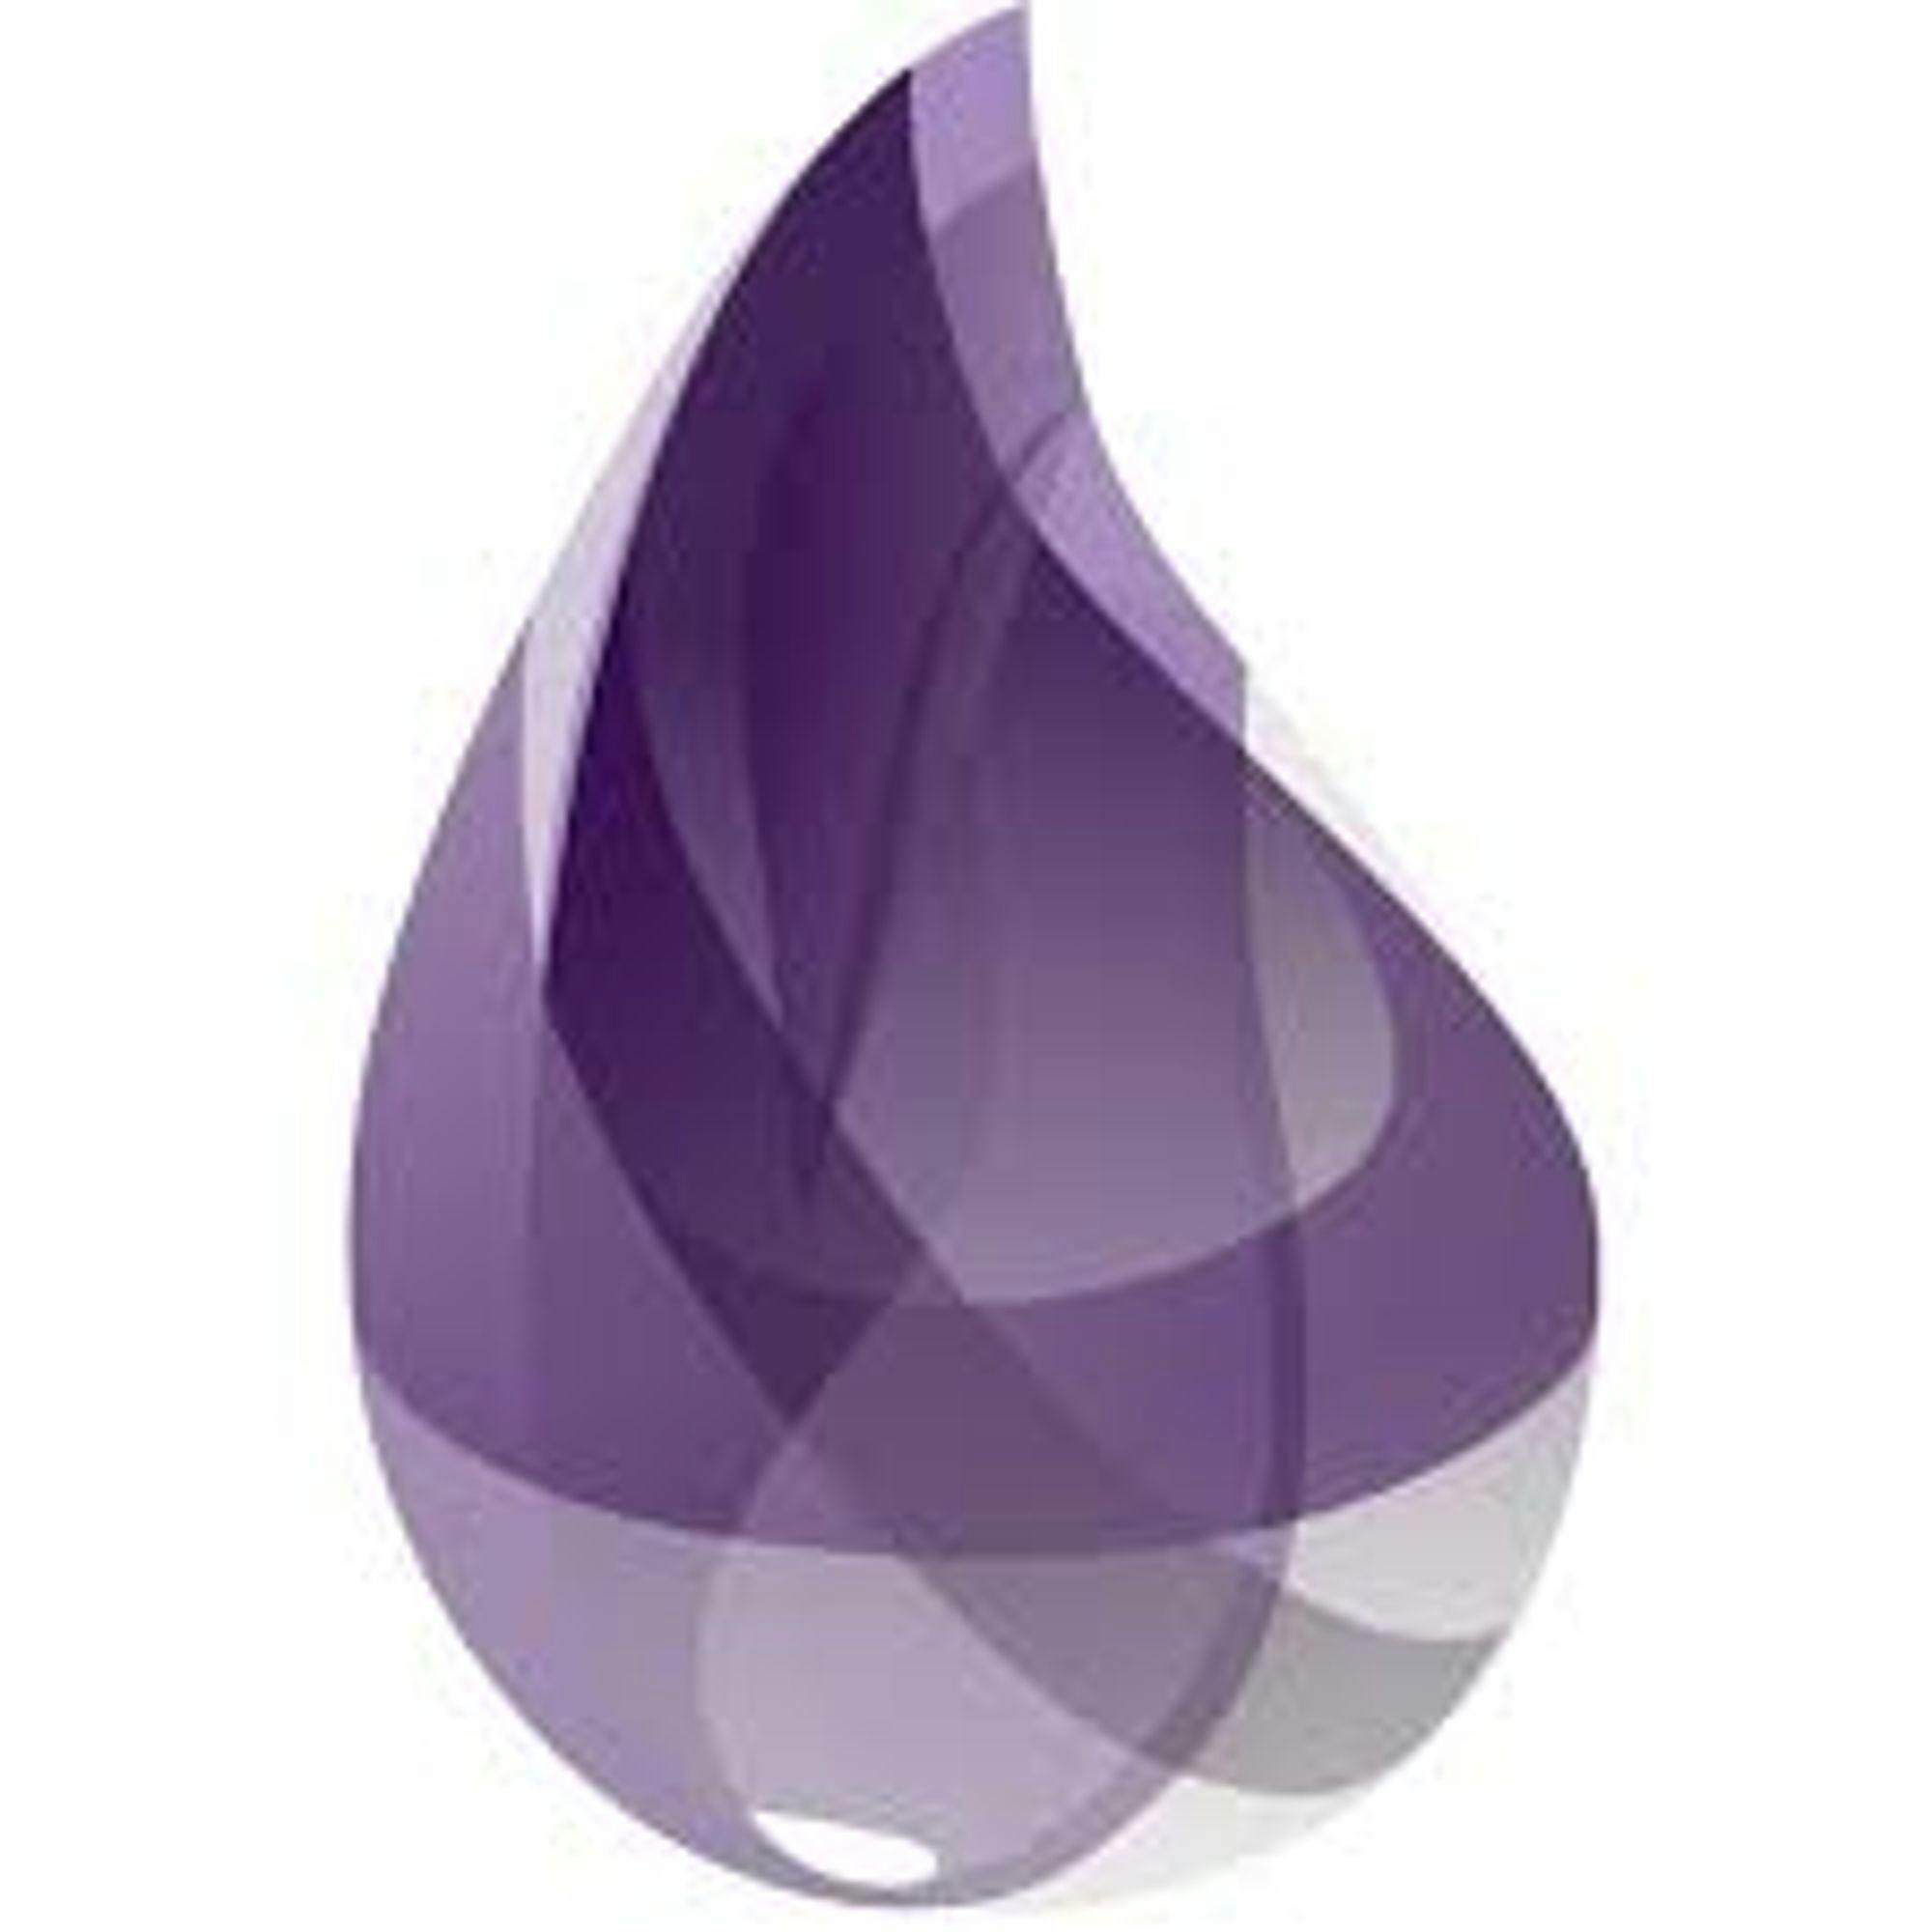 Elixir Diary Day 1: Playing with IEx